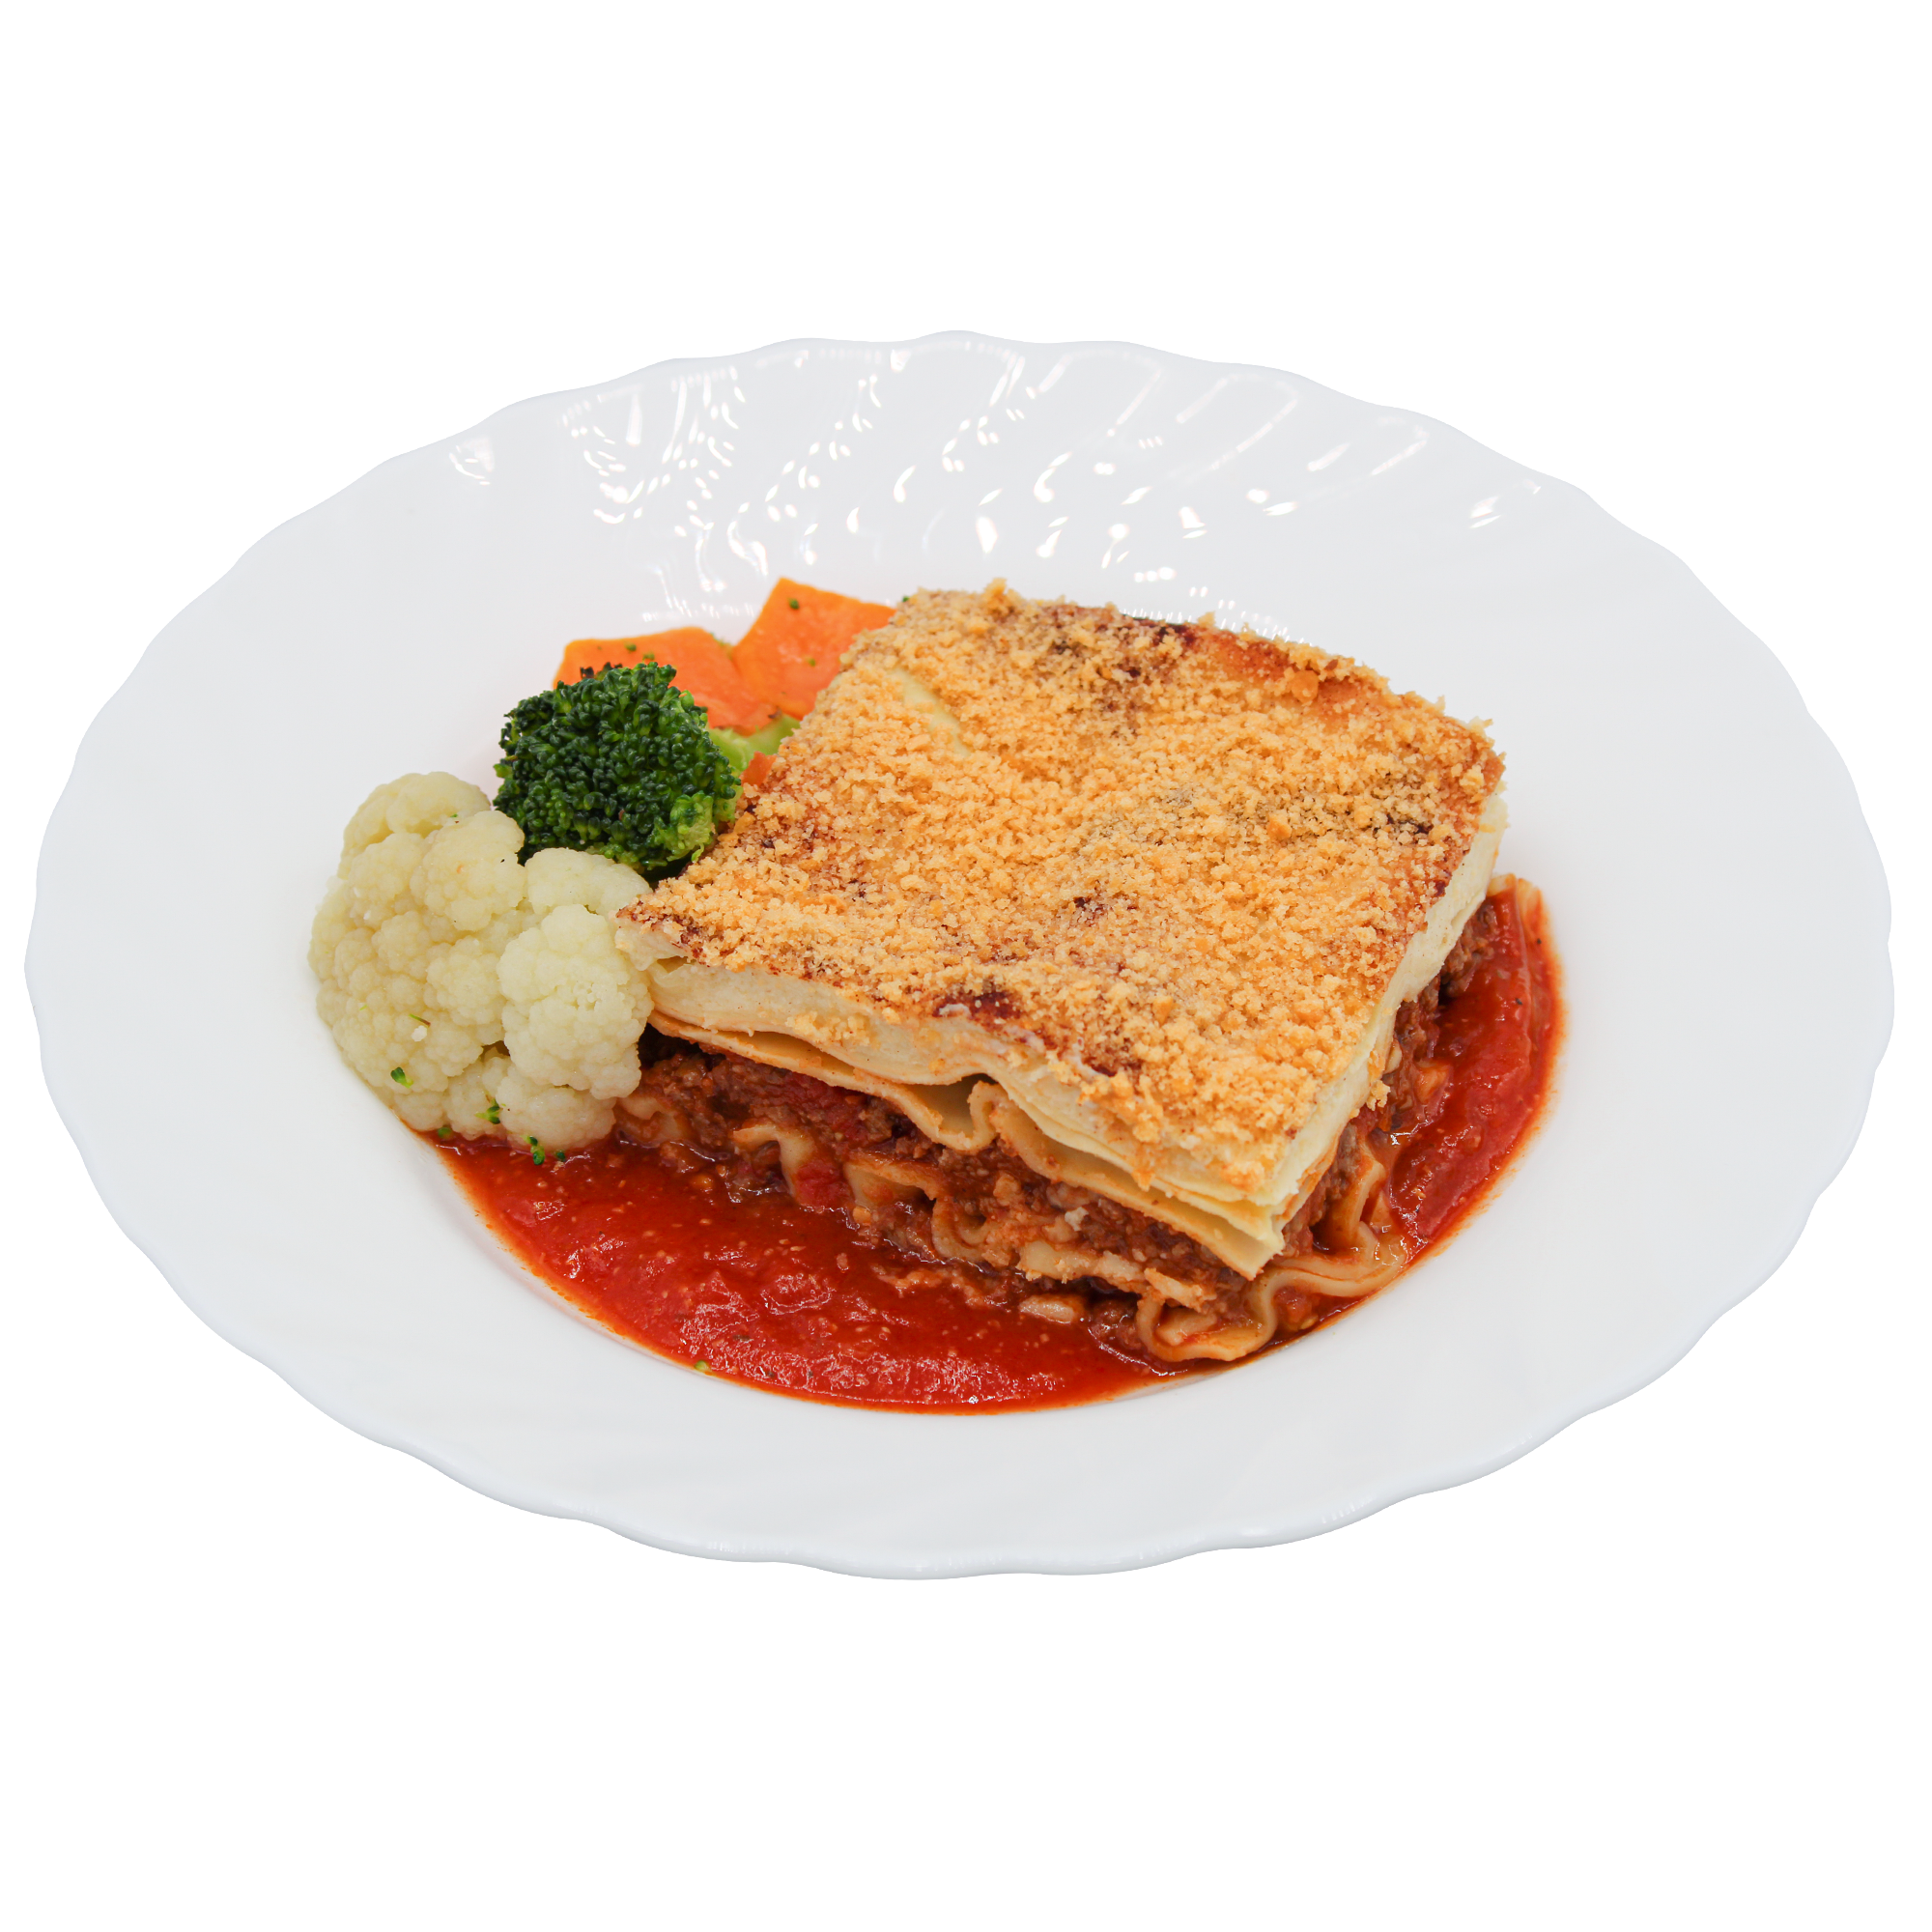 Meat Lasagne With Tomato Sauce & Roasted Vegetables